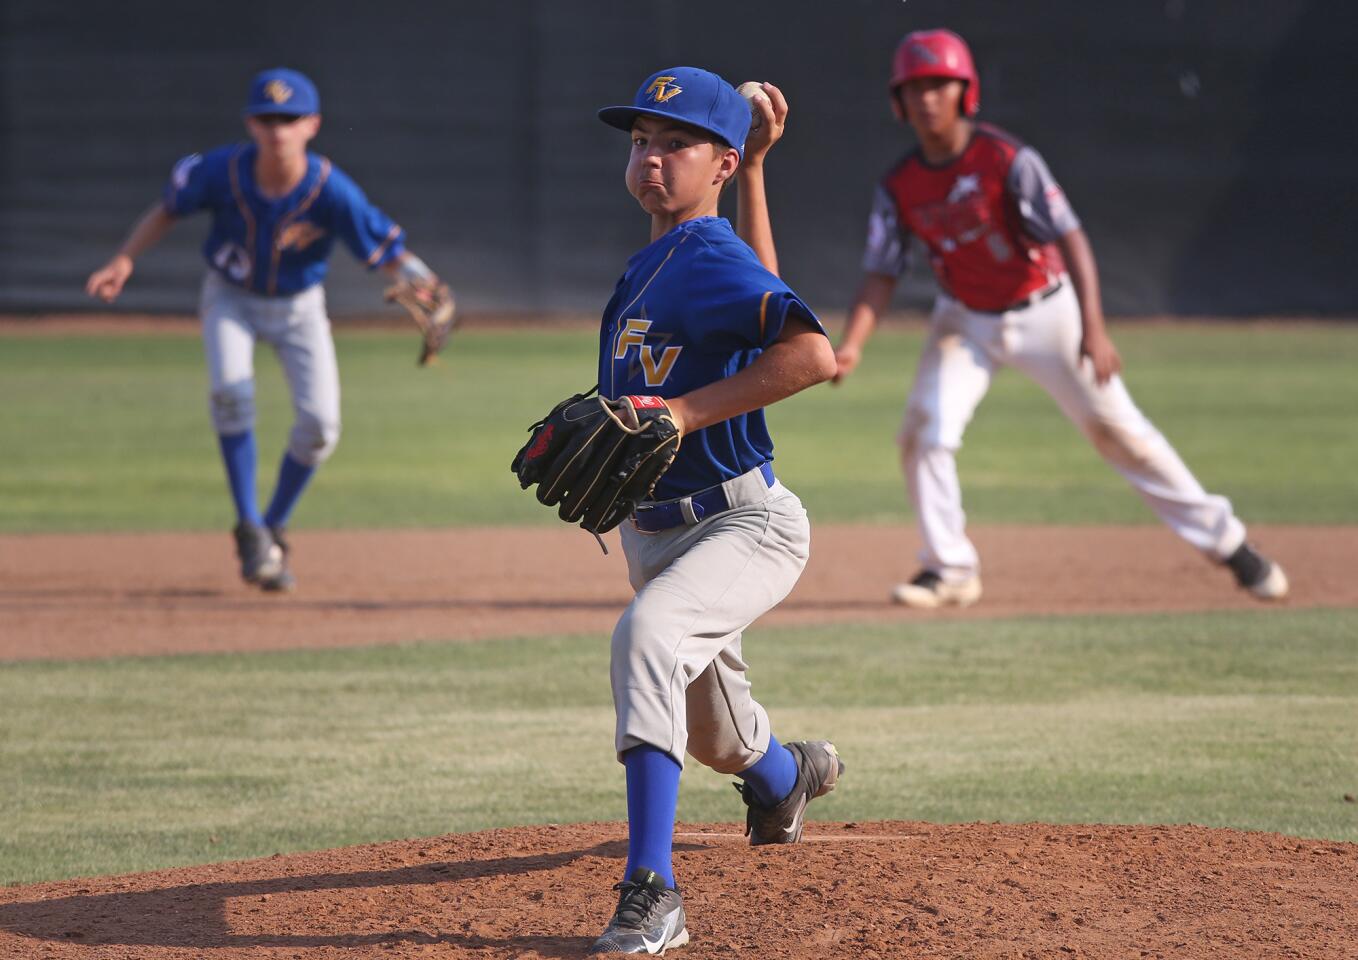 Fountain Valley 12-and-under Bronco team